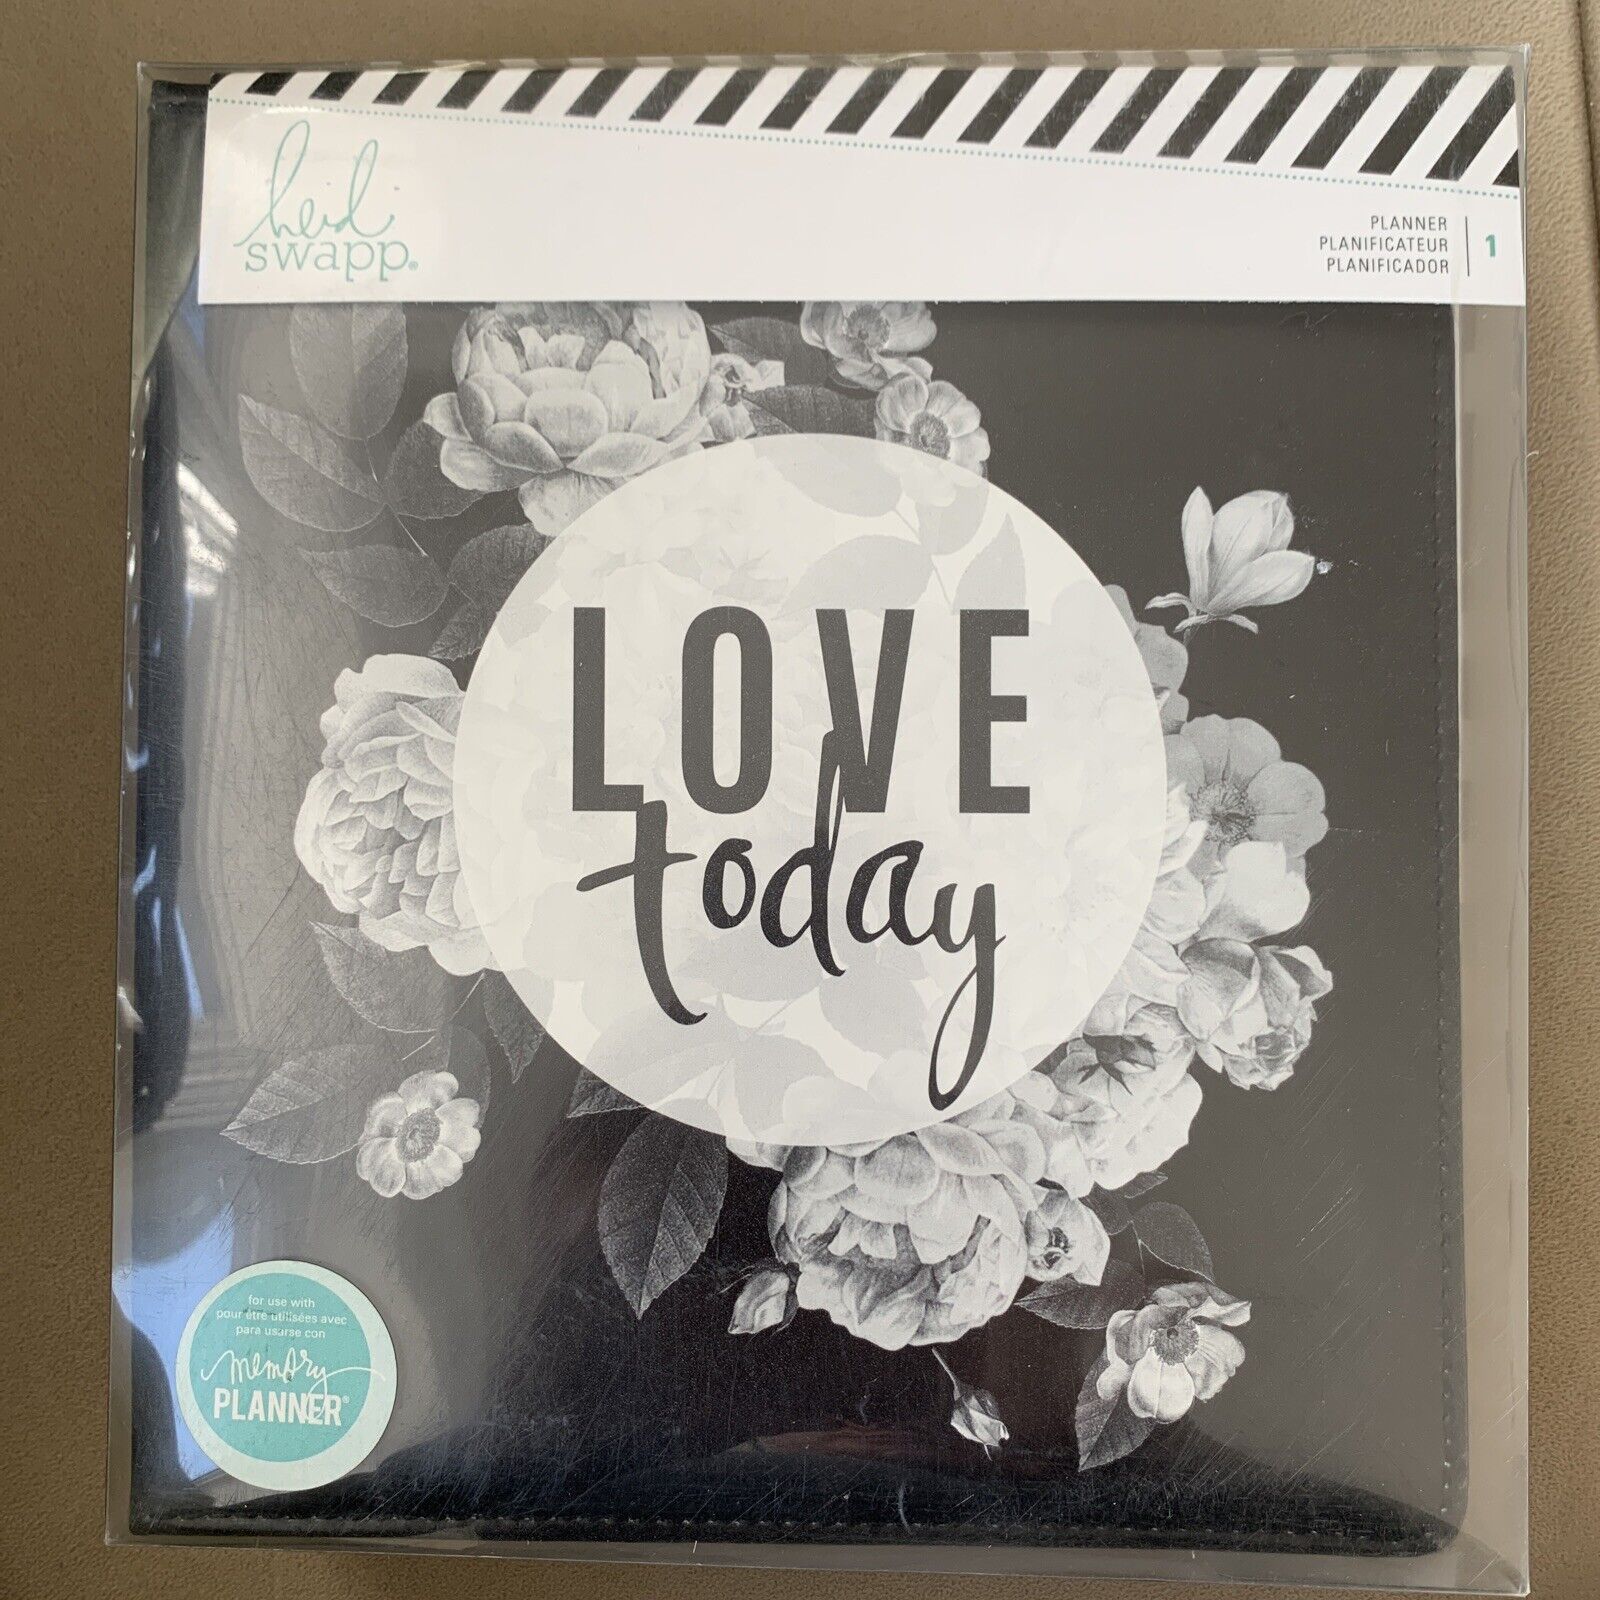 Heidi Swapp Love Today Large Memory Planner Undated Black & Floral Holiday Gift